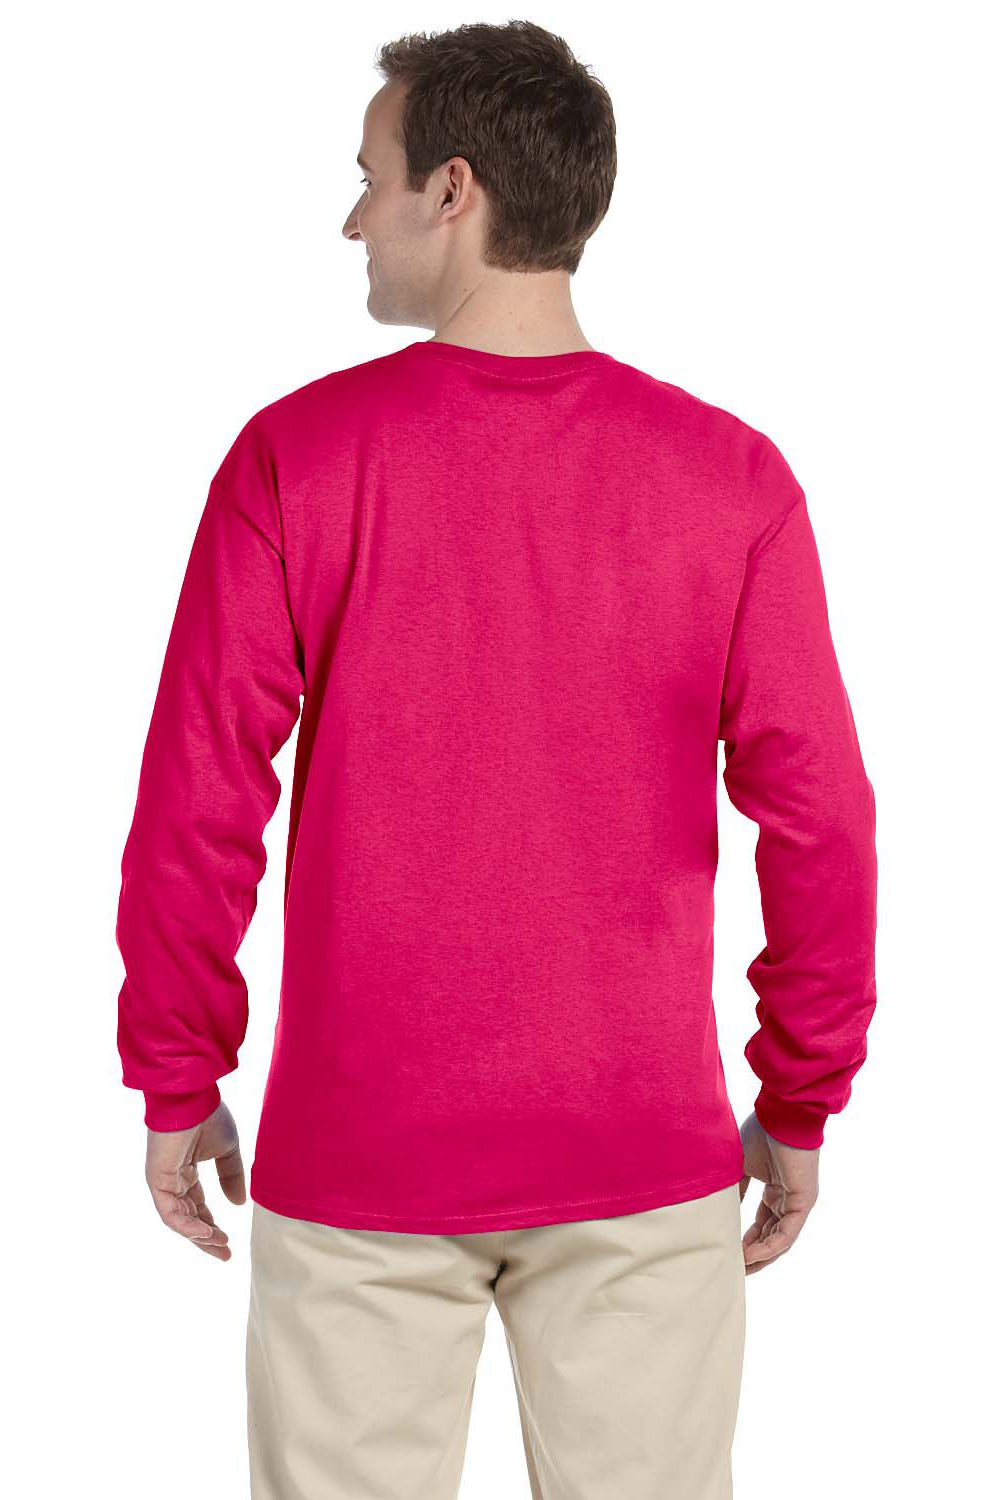 Fruit Of The Loom 4930 Mens HD Jersey Long Sleeve Crewneck T-Shirt Cyber Pink Back